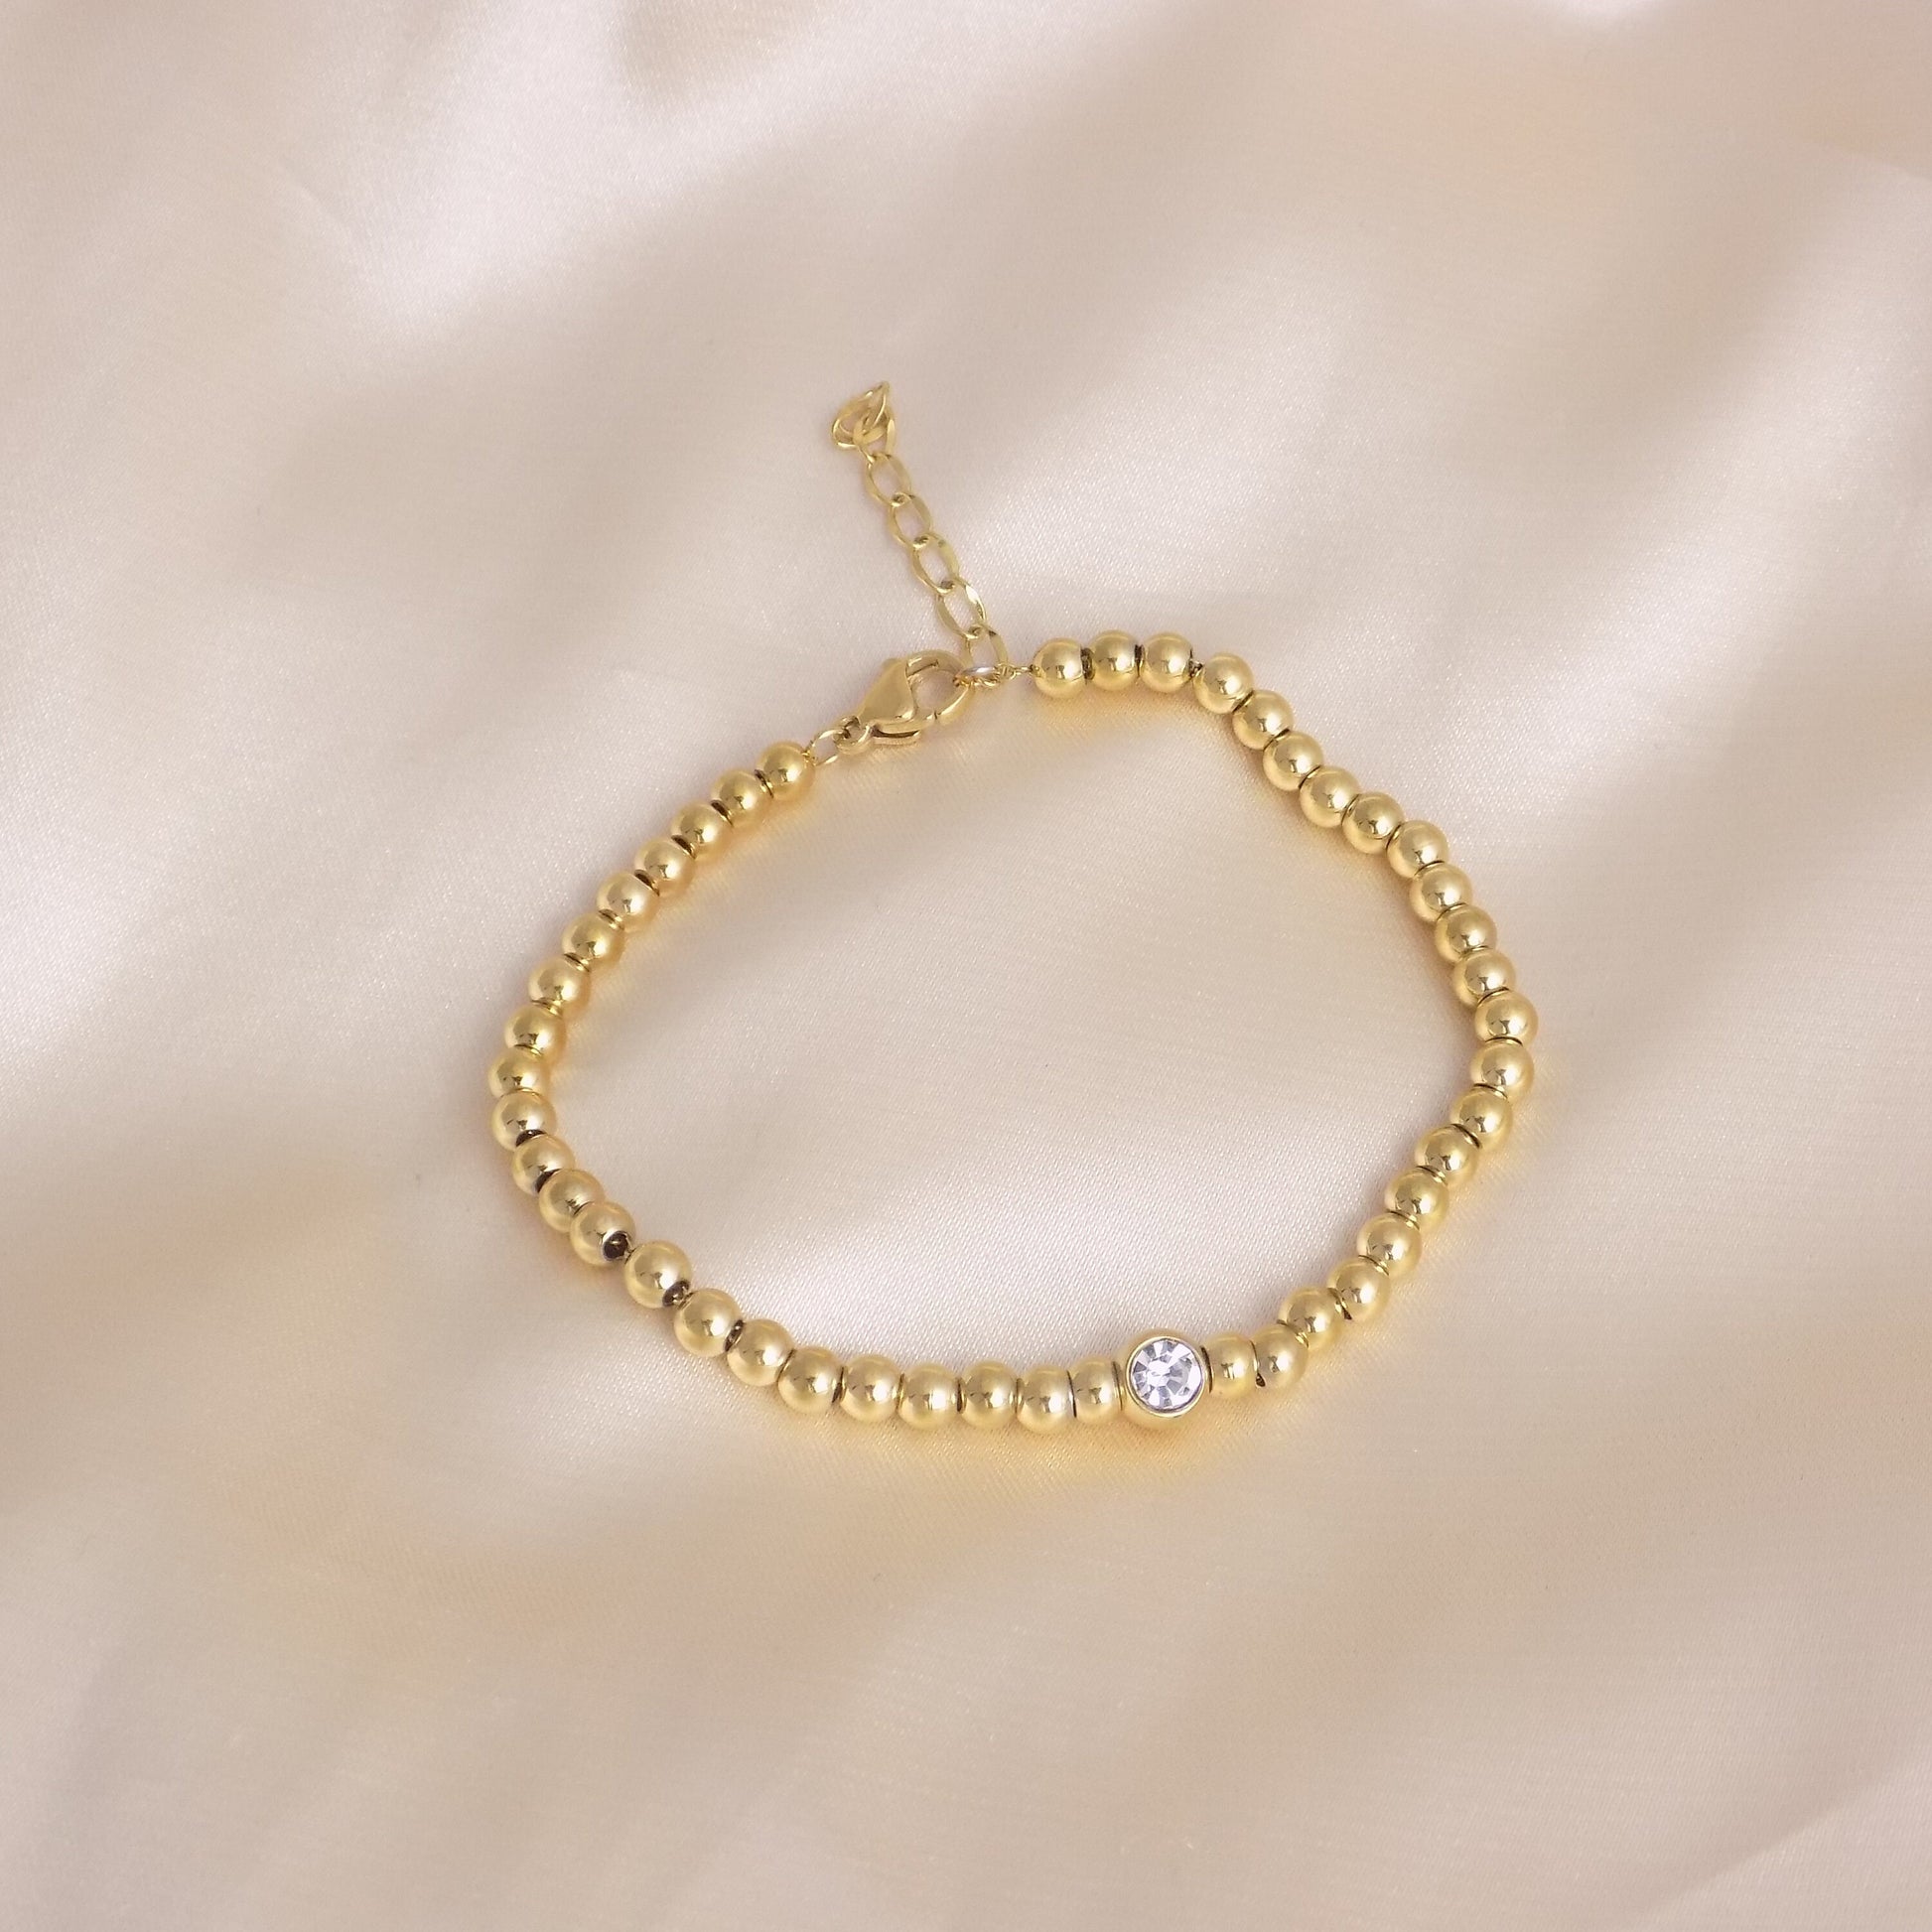 18K Gold Beaded Bracelet Adjustable Stainless Steel, Cubic Zirconia Stone, Delicate Gold Layer, Simple Everyday, M7-117